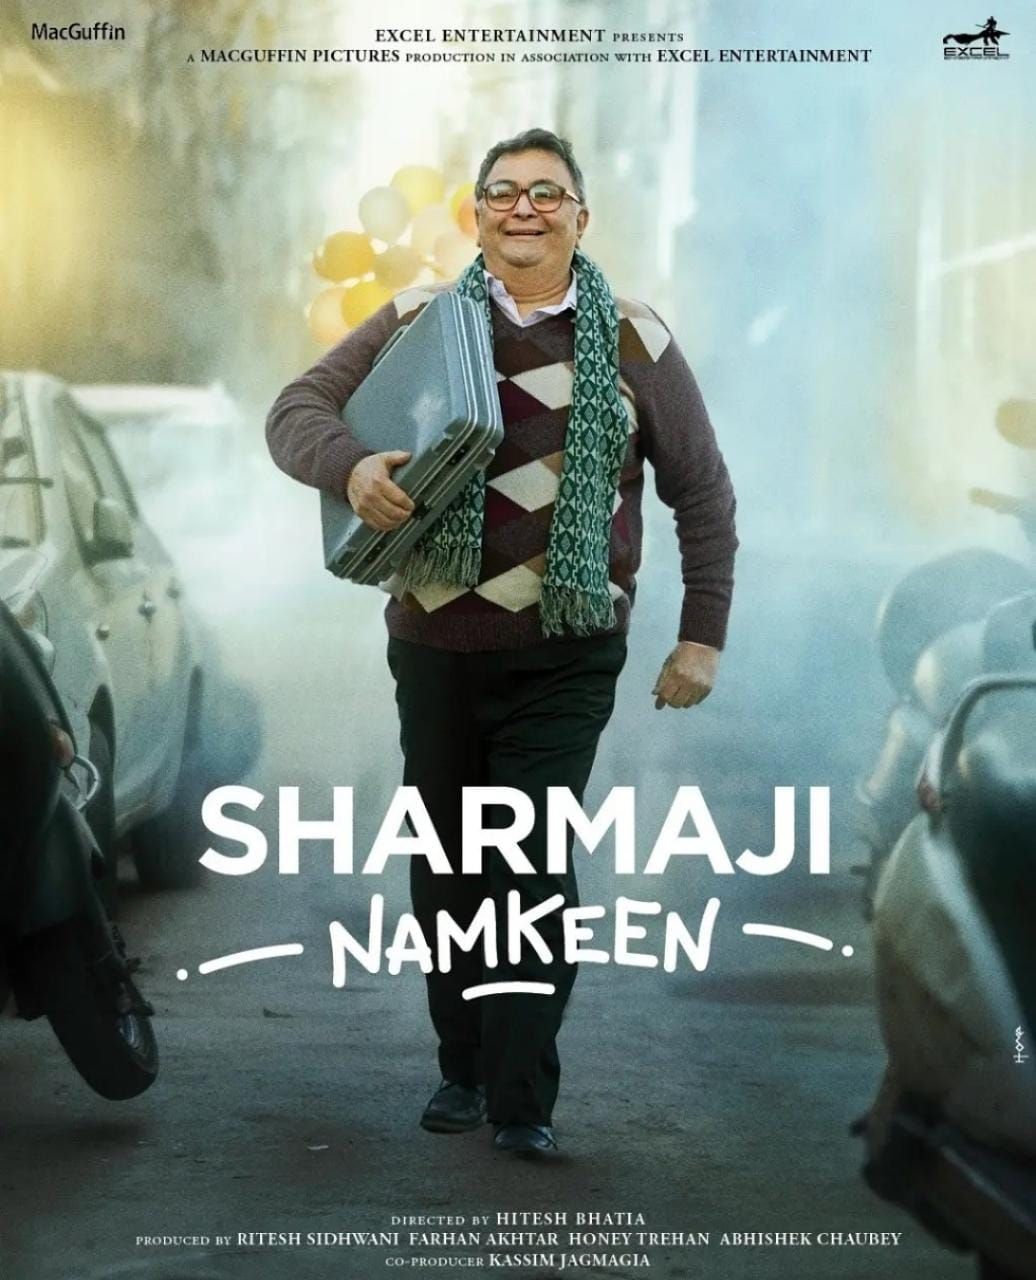 Sharmaji Namkeen: On Rishi Kapoor's birthday, daughter Riddhima Sahni unveil the late actor's look from his last film; see poster